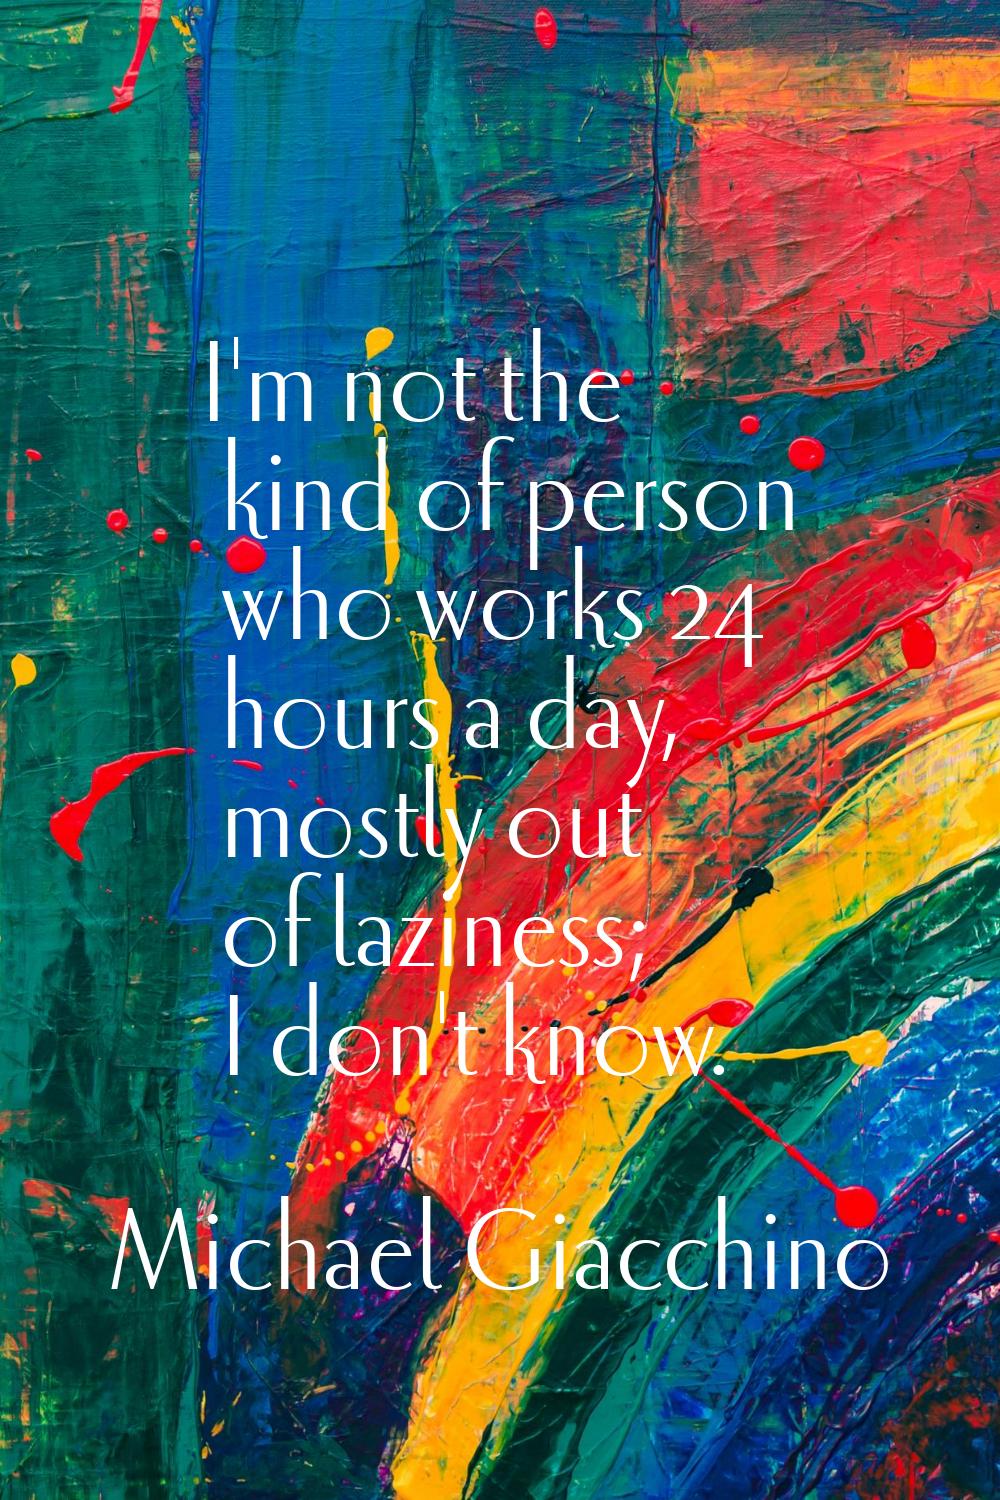 I'm not the kind of person who works 24 hours a day, mostly out of laziness; I don't know.